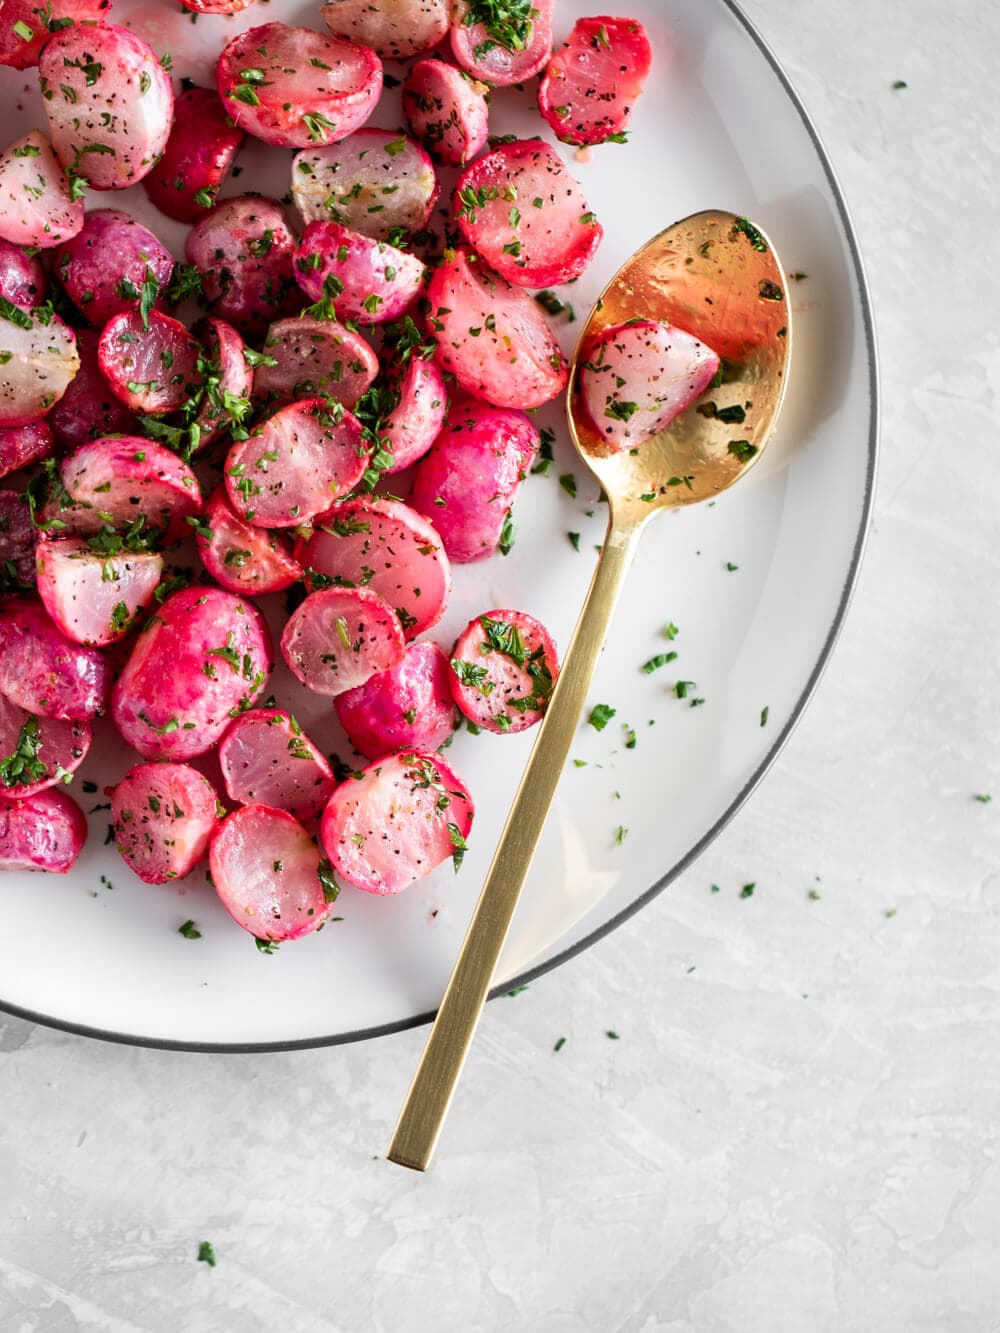 More than 100+ amazing recipes for the Jewish holiday of Passover, including a bunch of go-to, favorite Pesach recipes to make for Seder dinner, including appetizers, side dishes, and desserts, with plenty that work as great leftovers for the holiday week to follow. | glitterinc.com | @glitterinc // Roasted Radishes